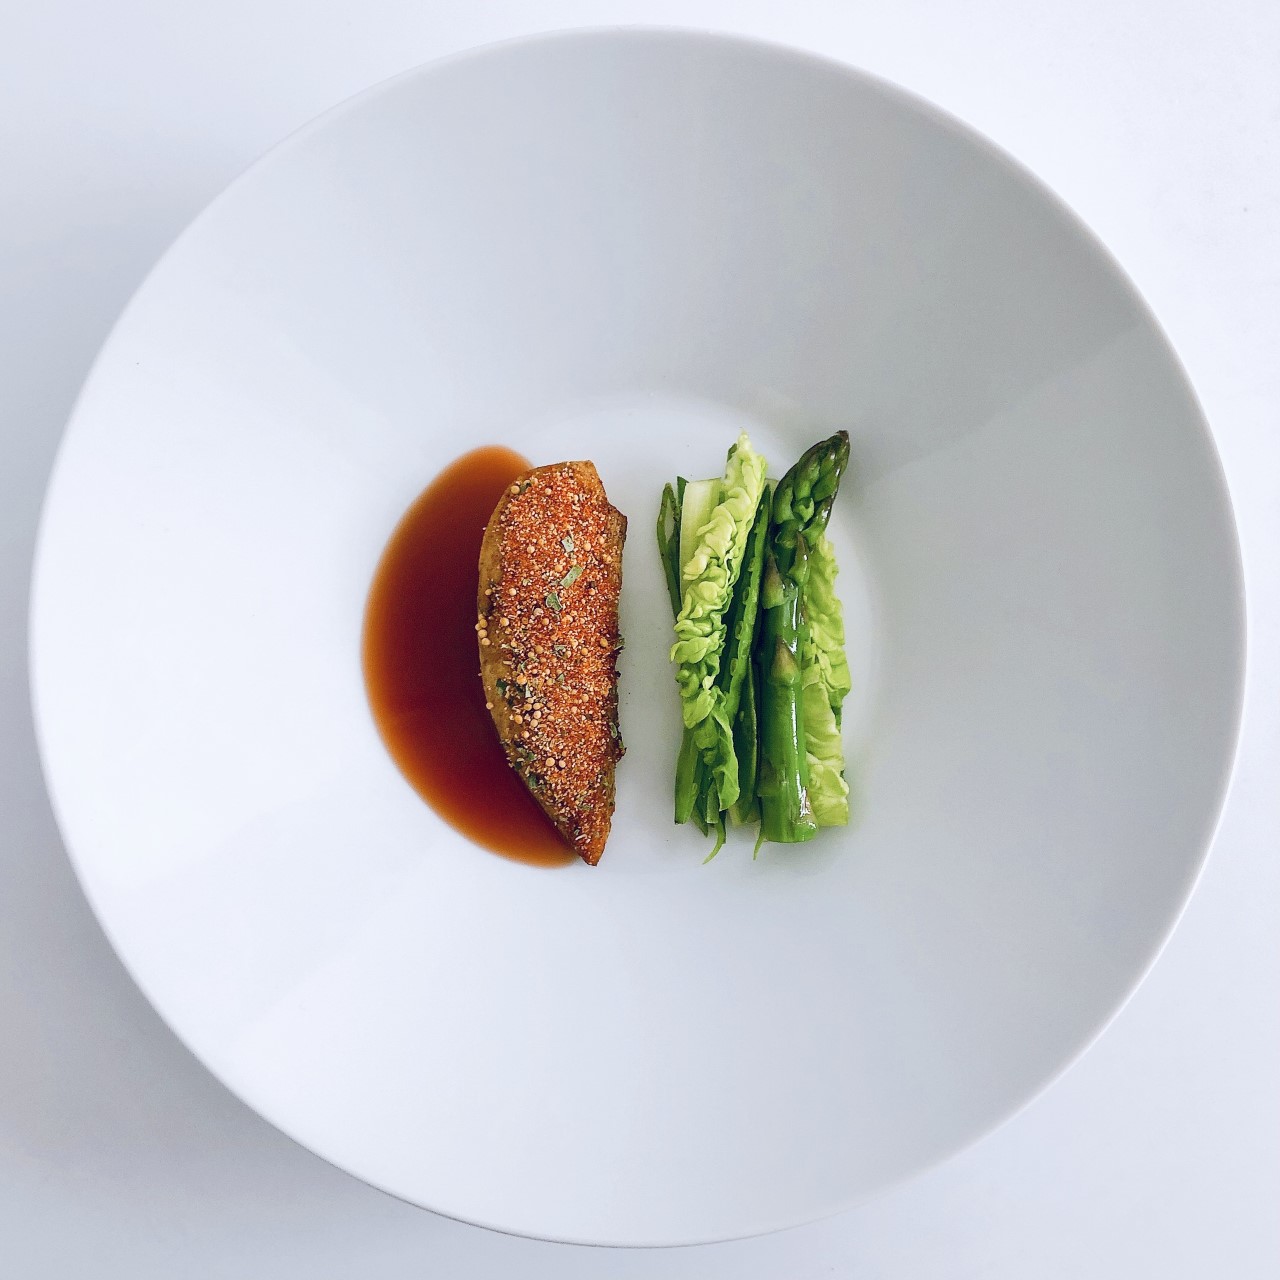 Blacktail chicken with asparagus, mustard and barbecue jus